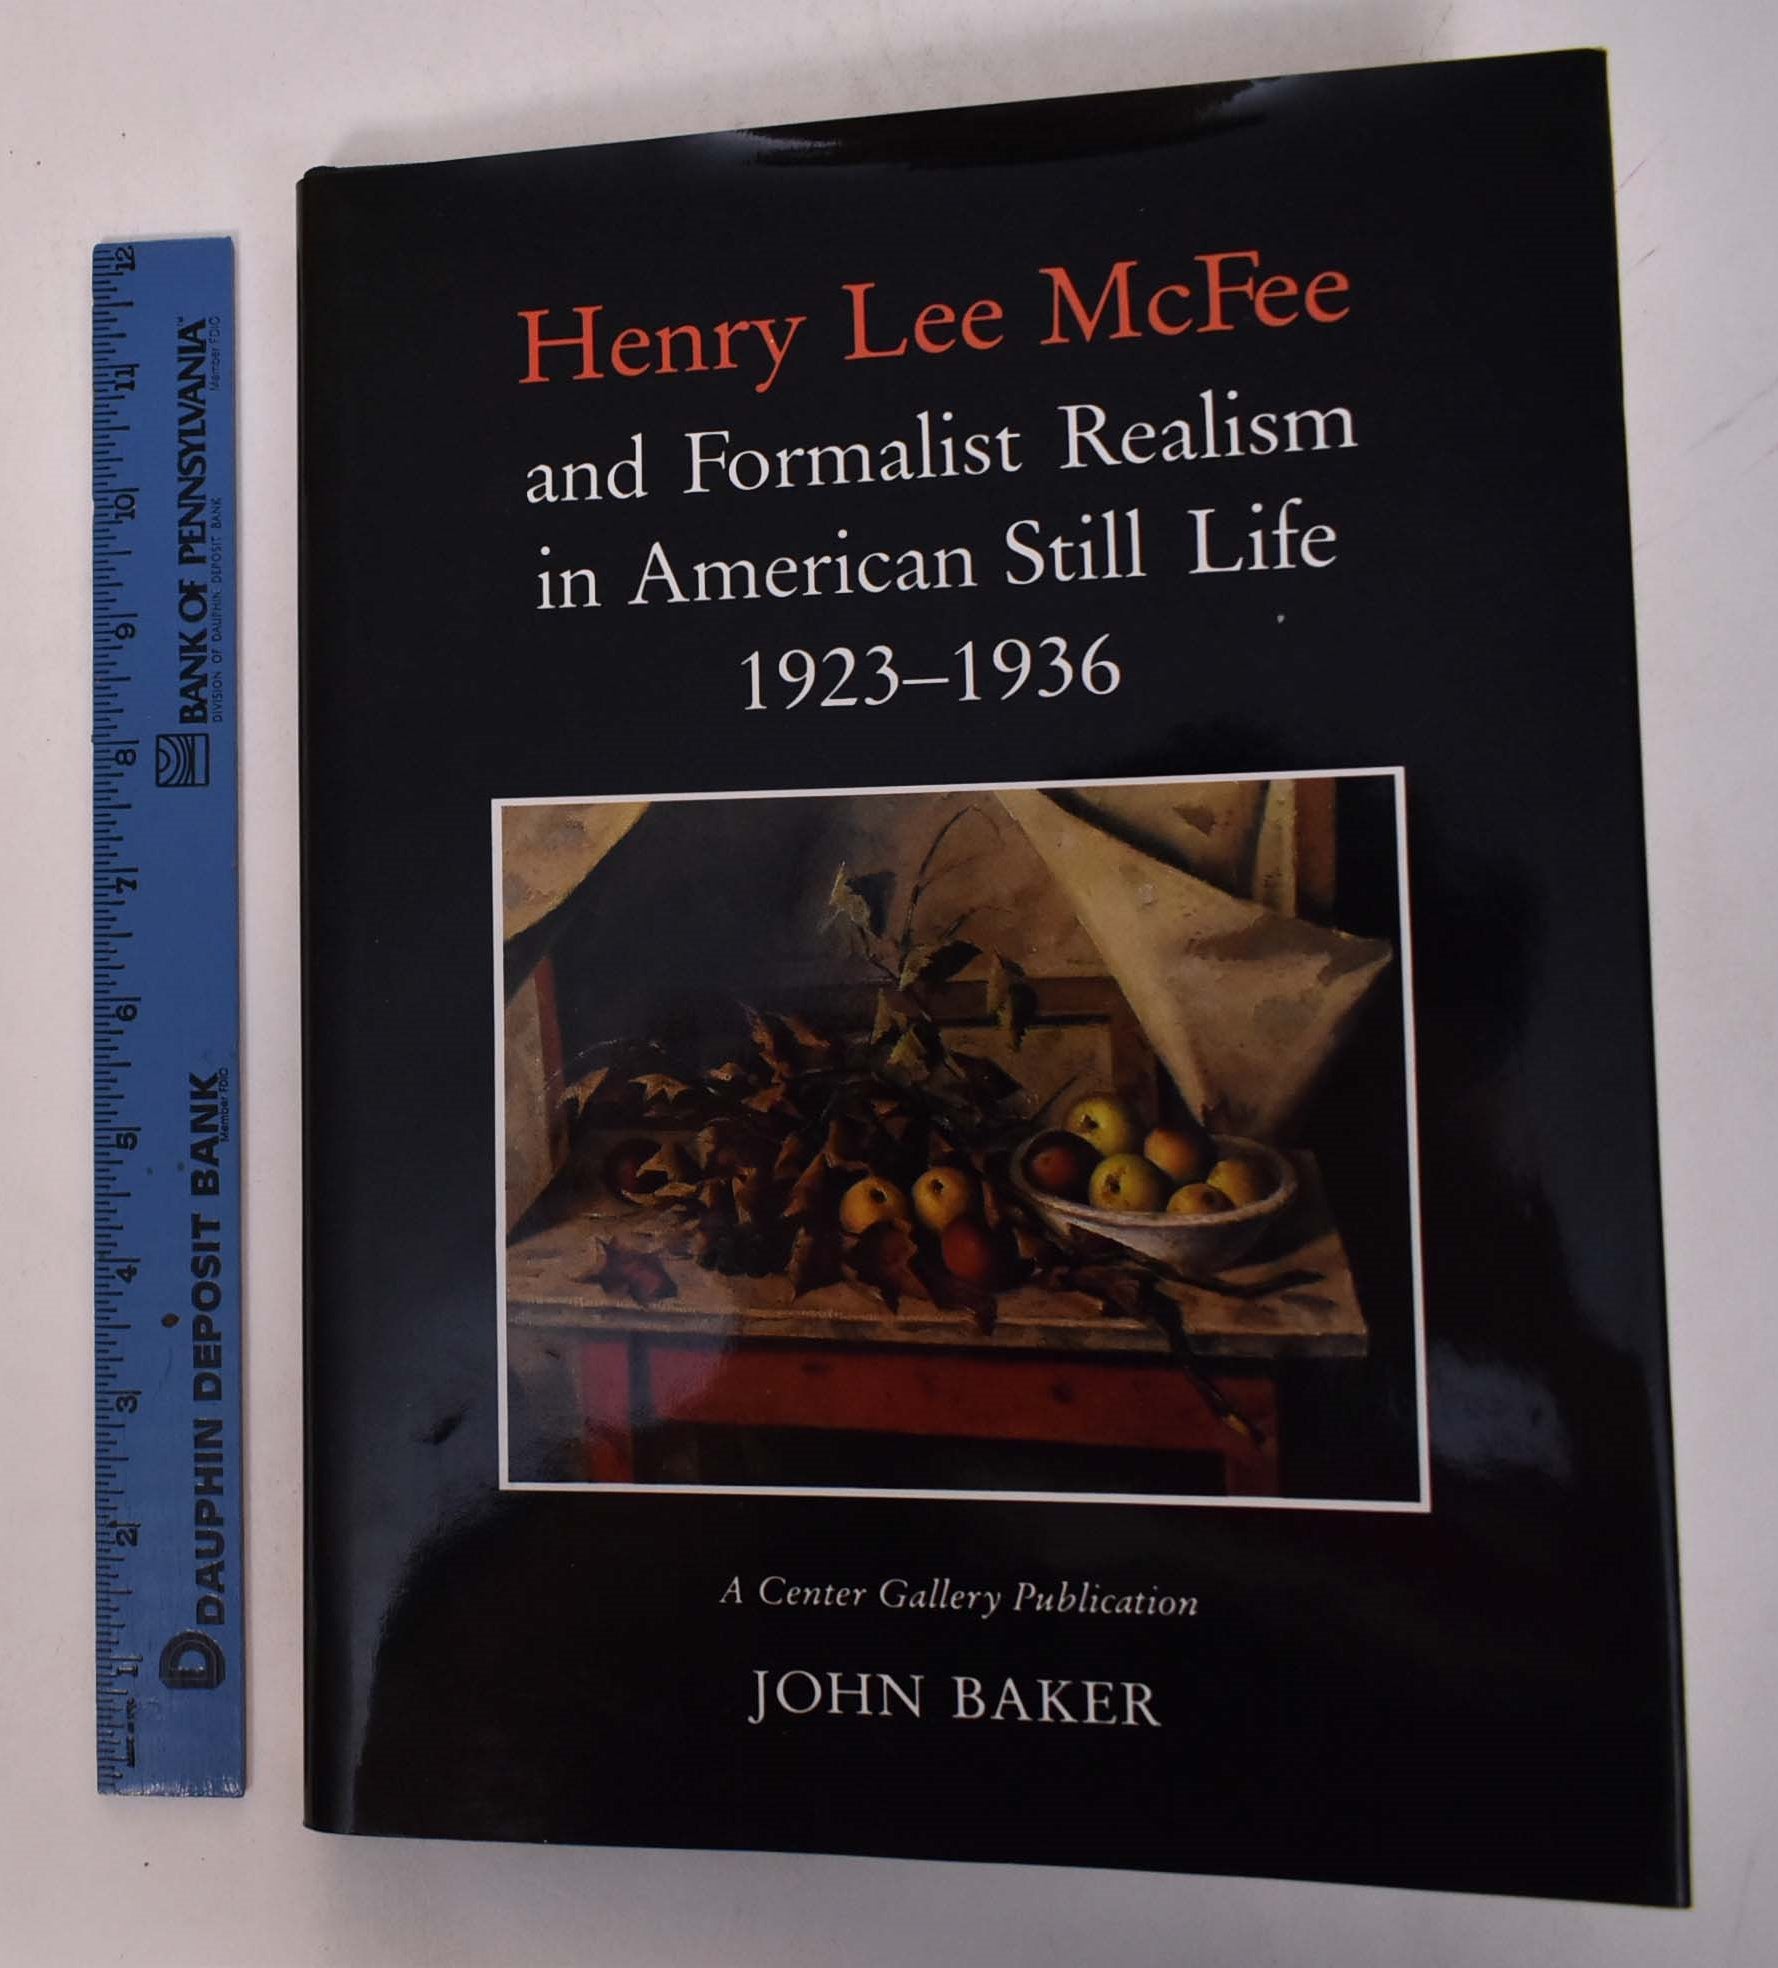 Baker, John - Henry Lee Mcfee, and Formalist Realism in American Still Life, 1923-1936